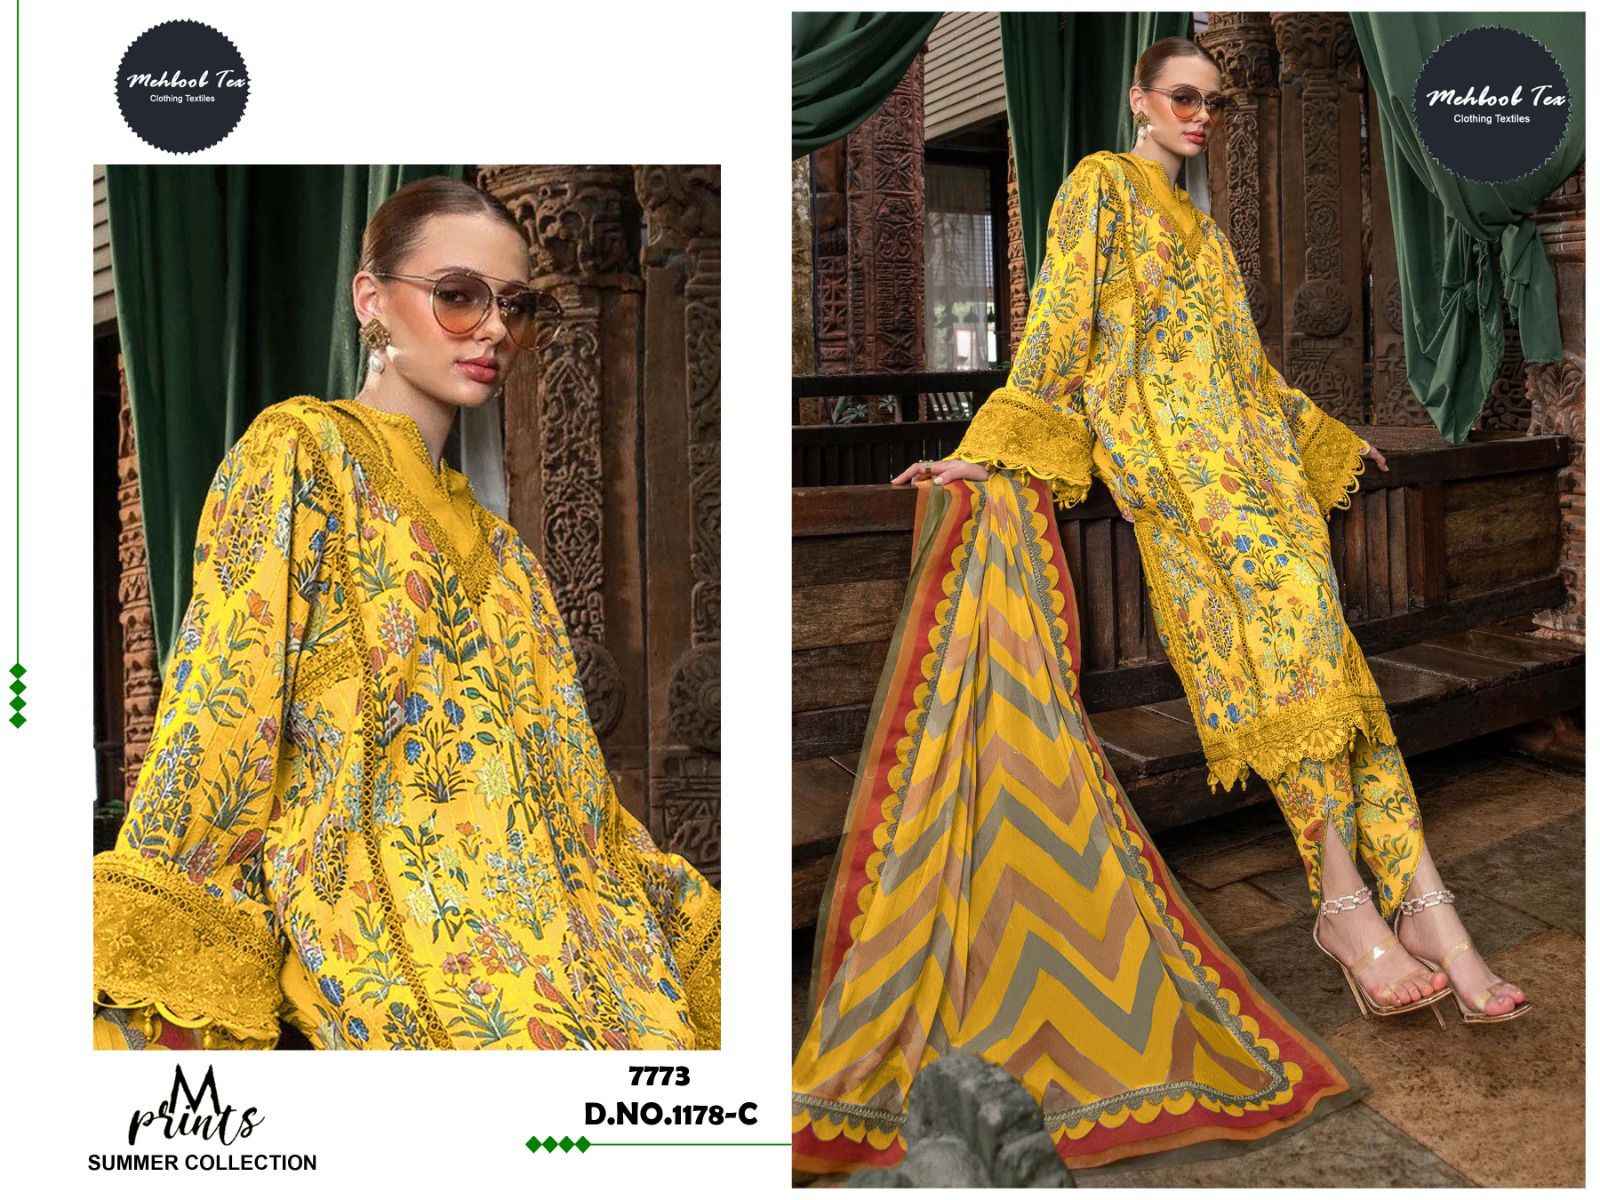 MEHBOOB TEX MARIA B MPRINT SPRING SUMMER COLLECTION WHOLESALE FACTORY